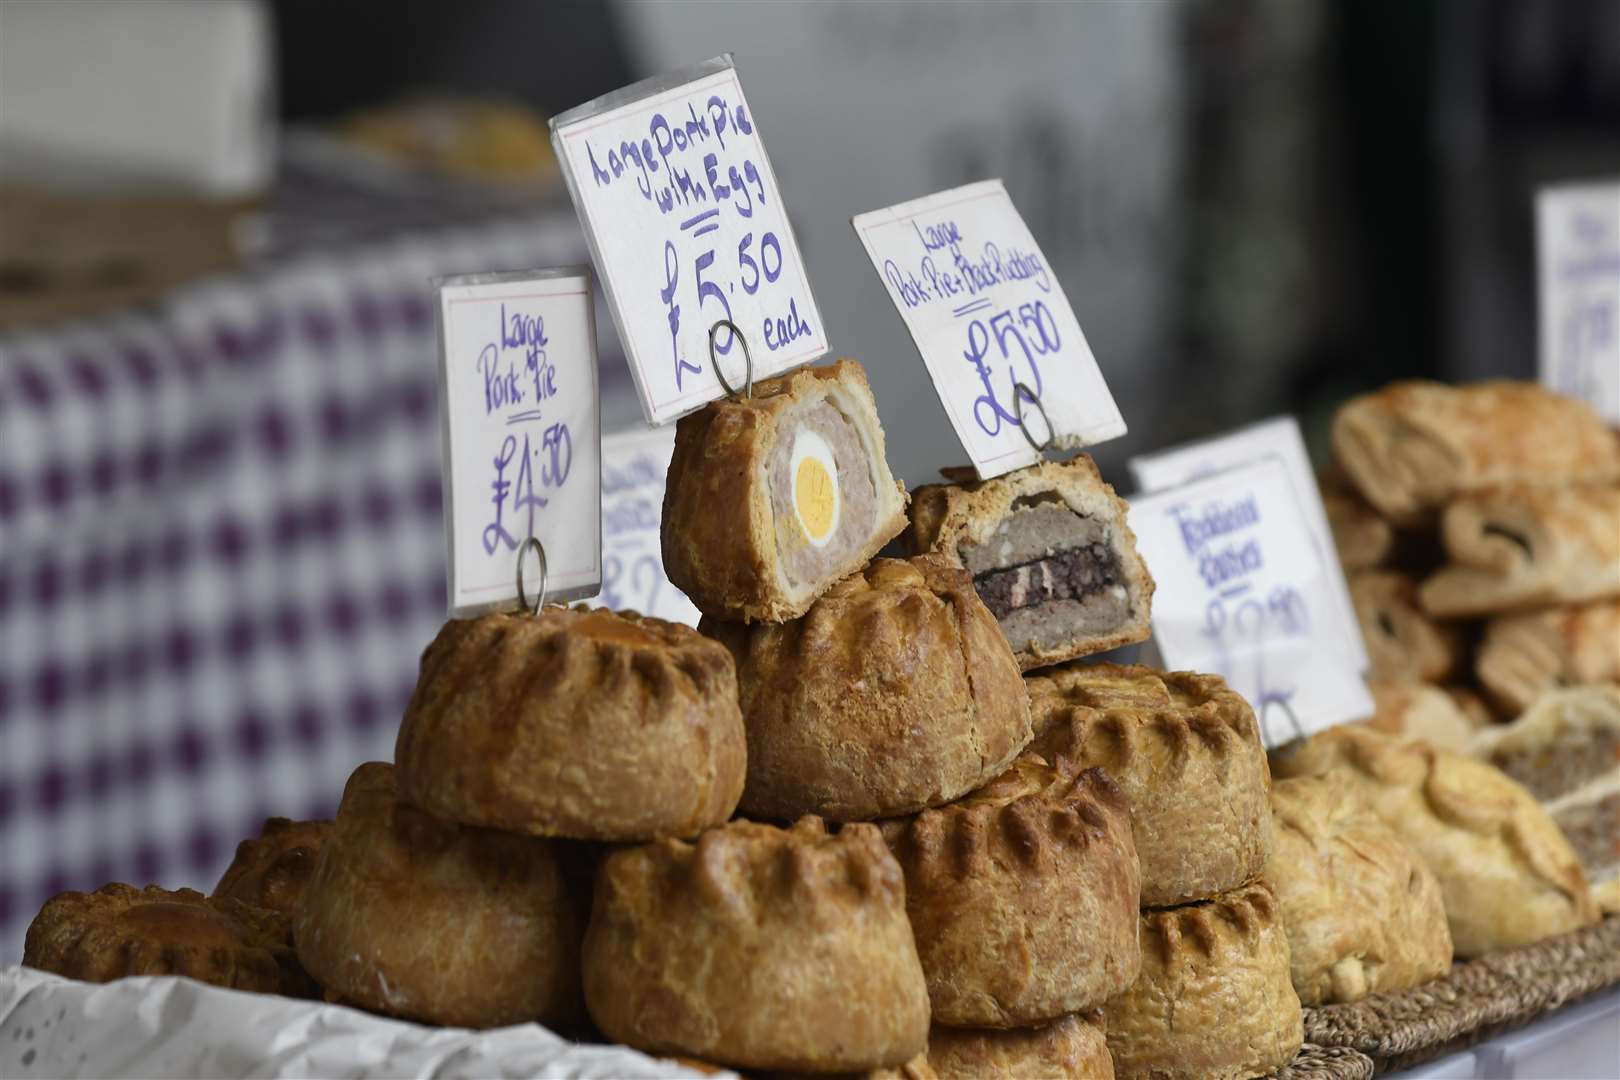 Foodie treats will be on offer in sevenoaks. Picture: Tony Flashman